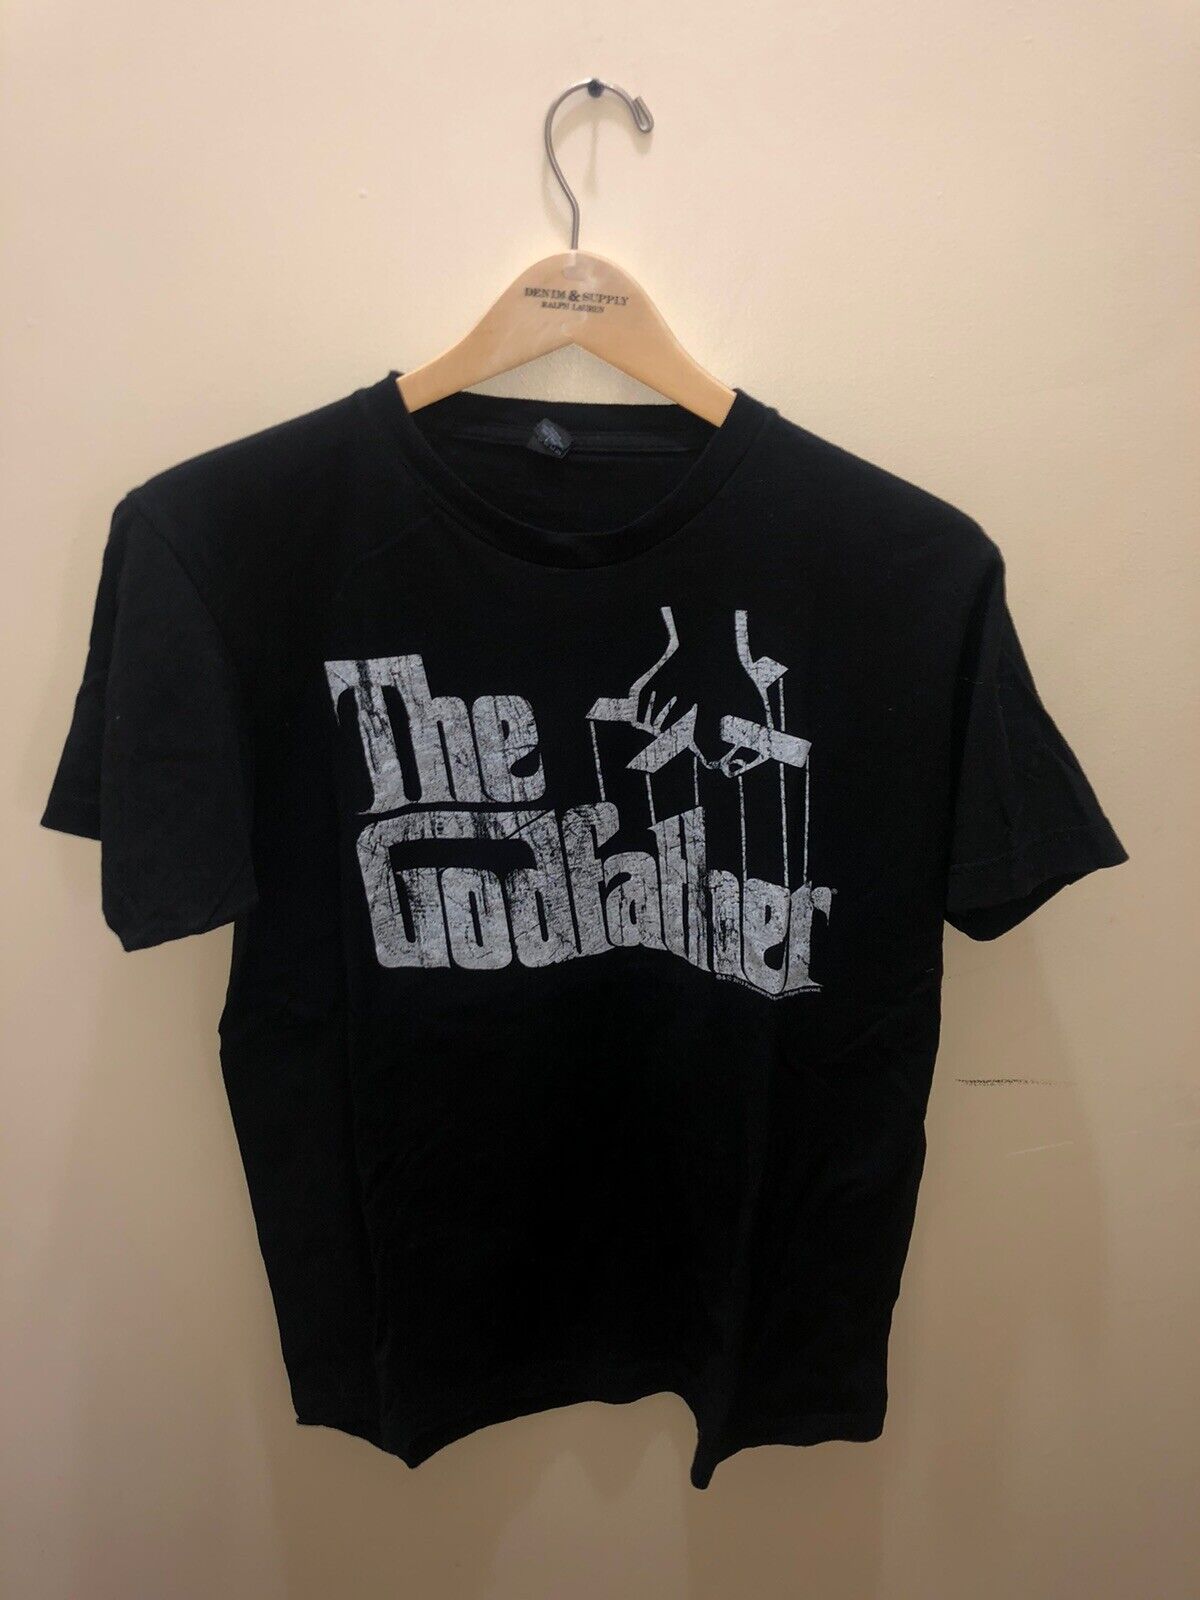 THE GODFATHER T-Shirt SIZE LARGE Movie Memorabilia Men's Collectible T-Shirt